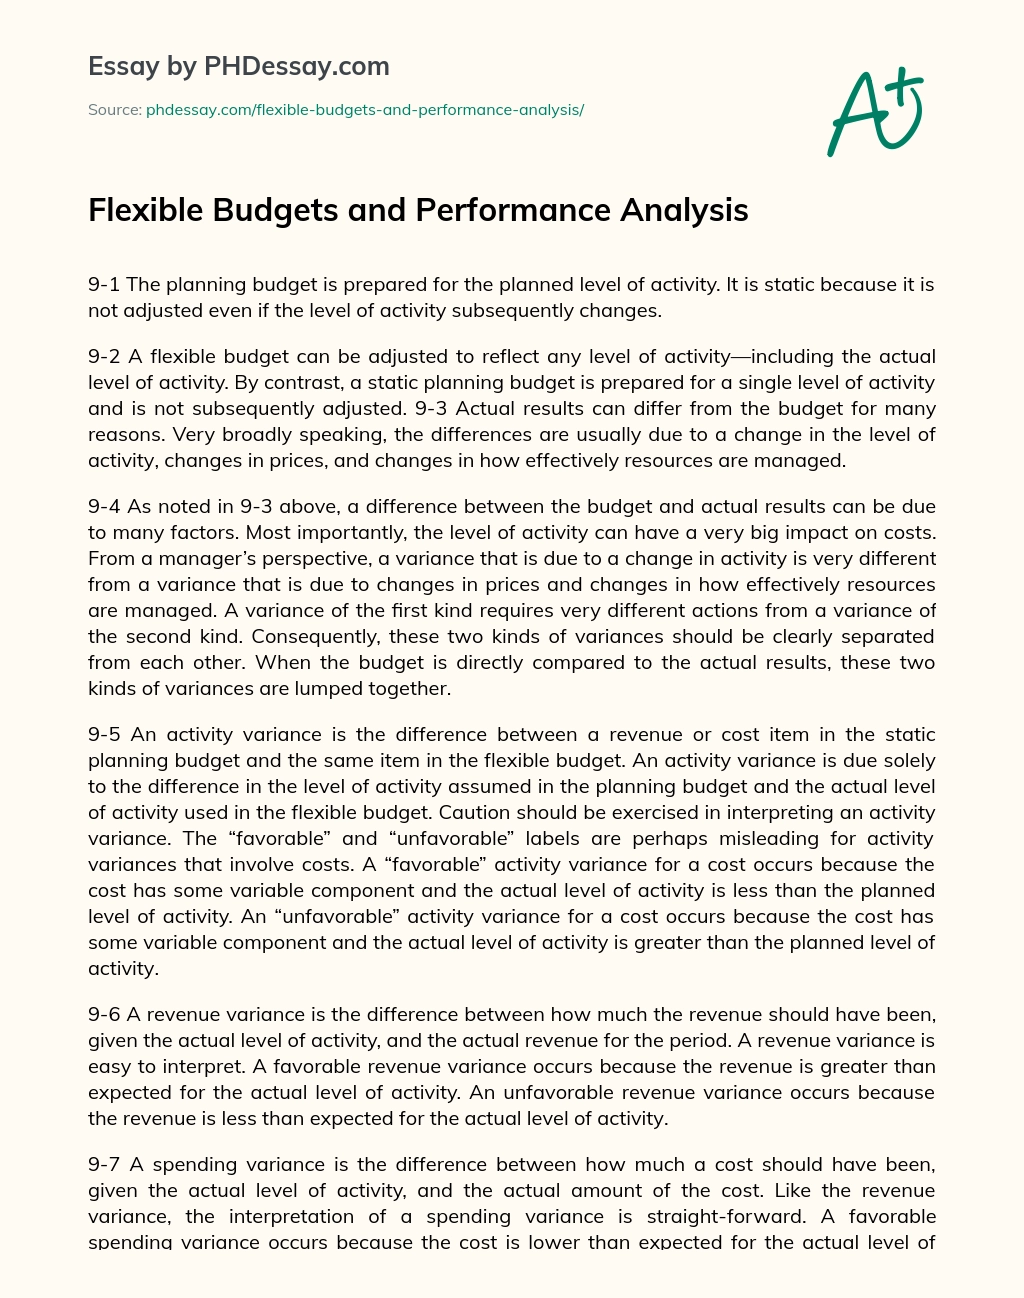 Flexible Budgets and Performance Analysis essay